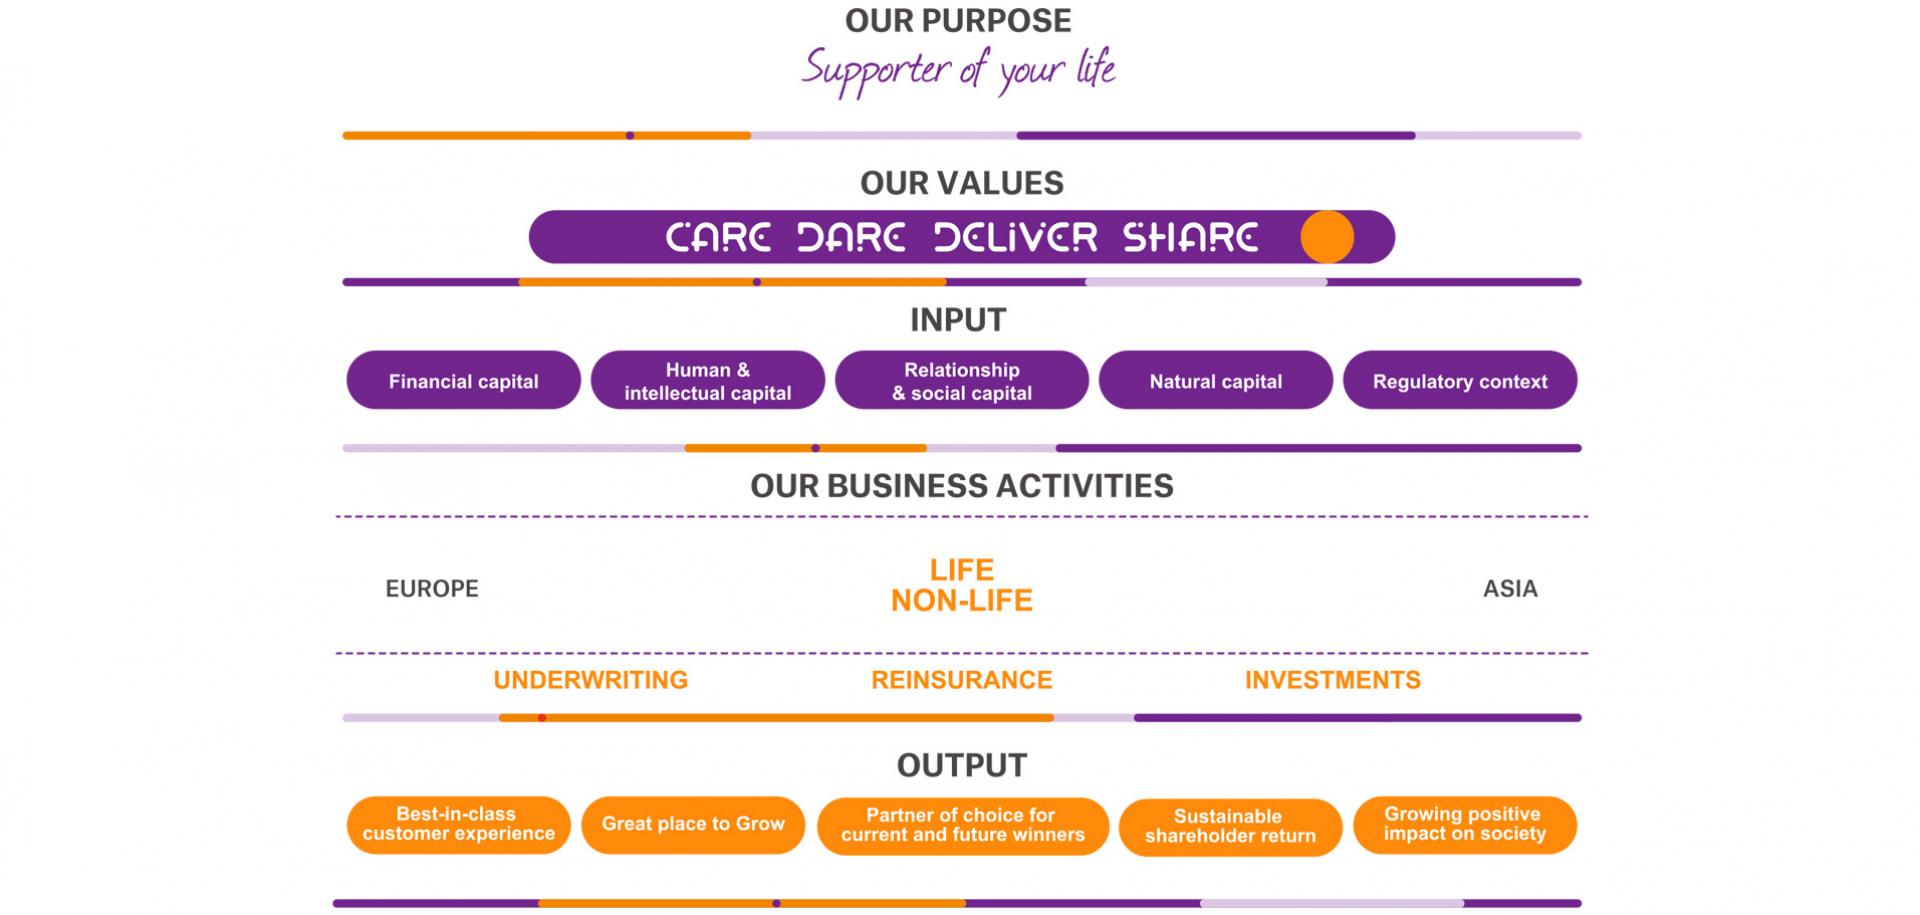 Ageas’s strategy and business model